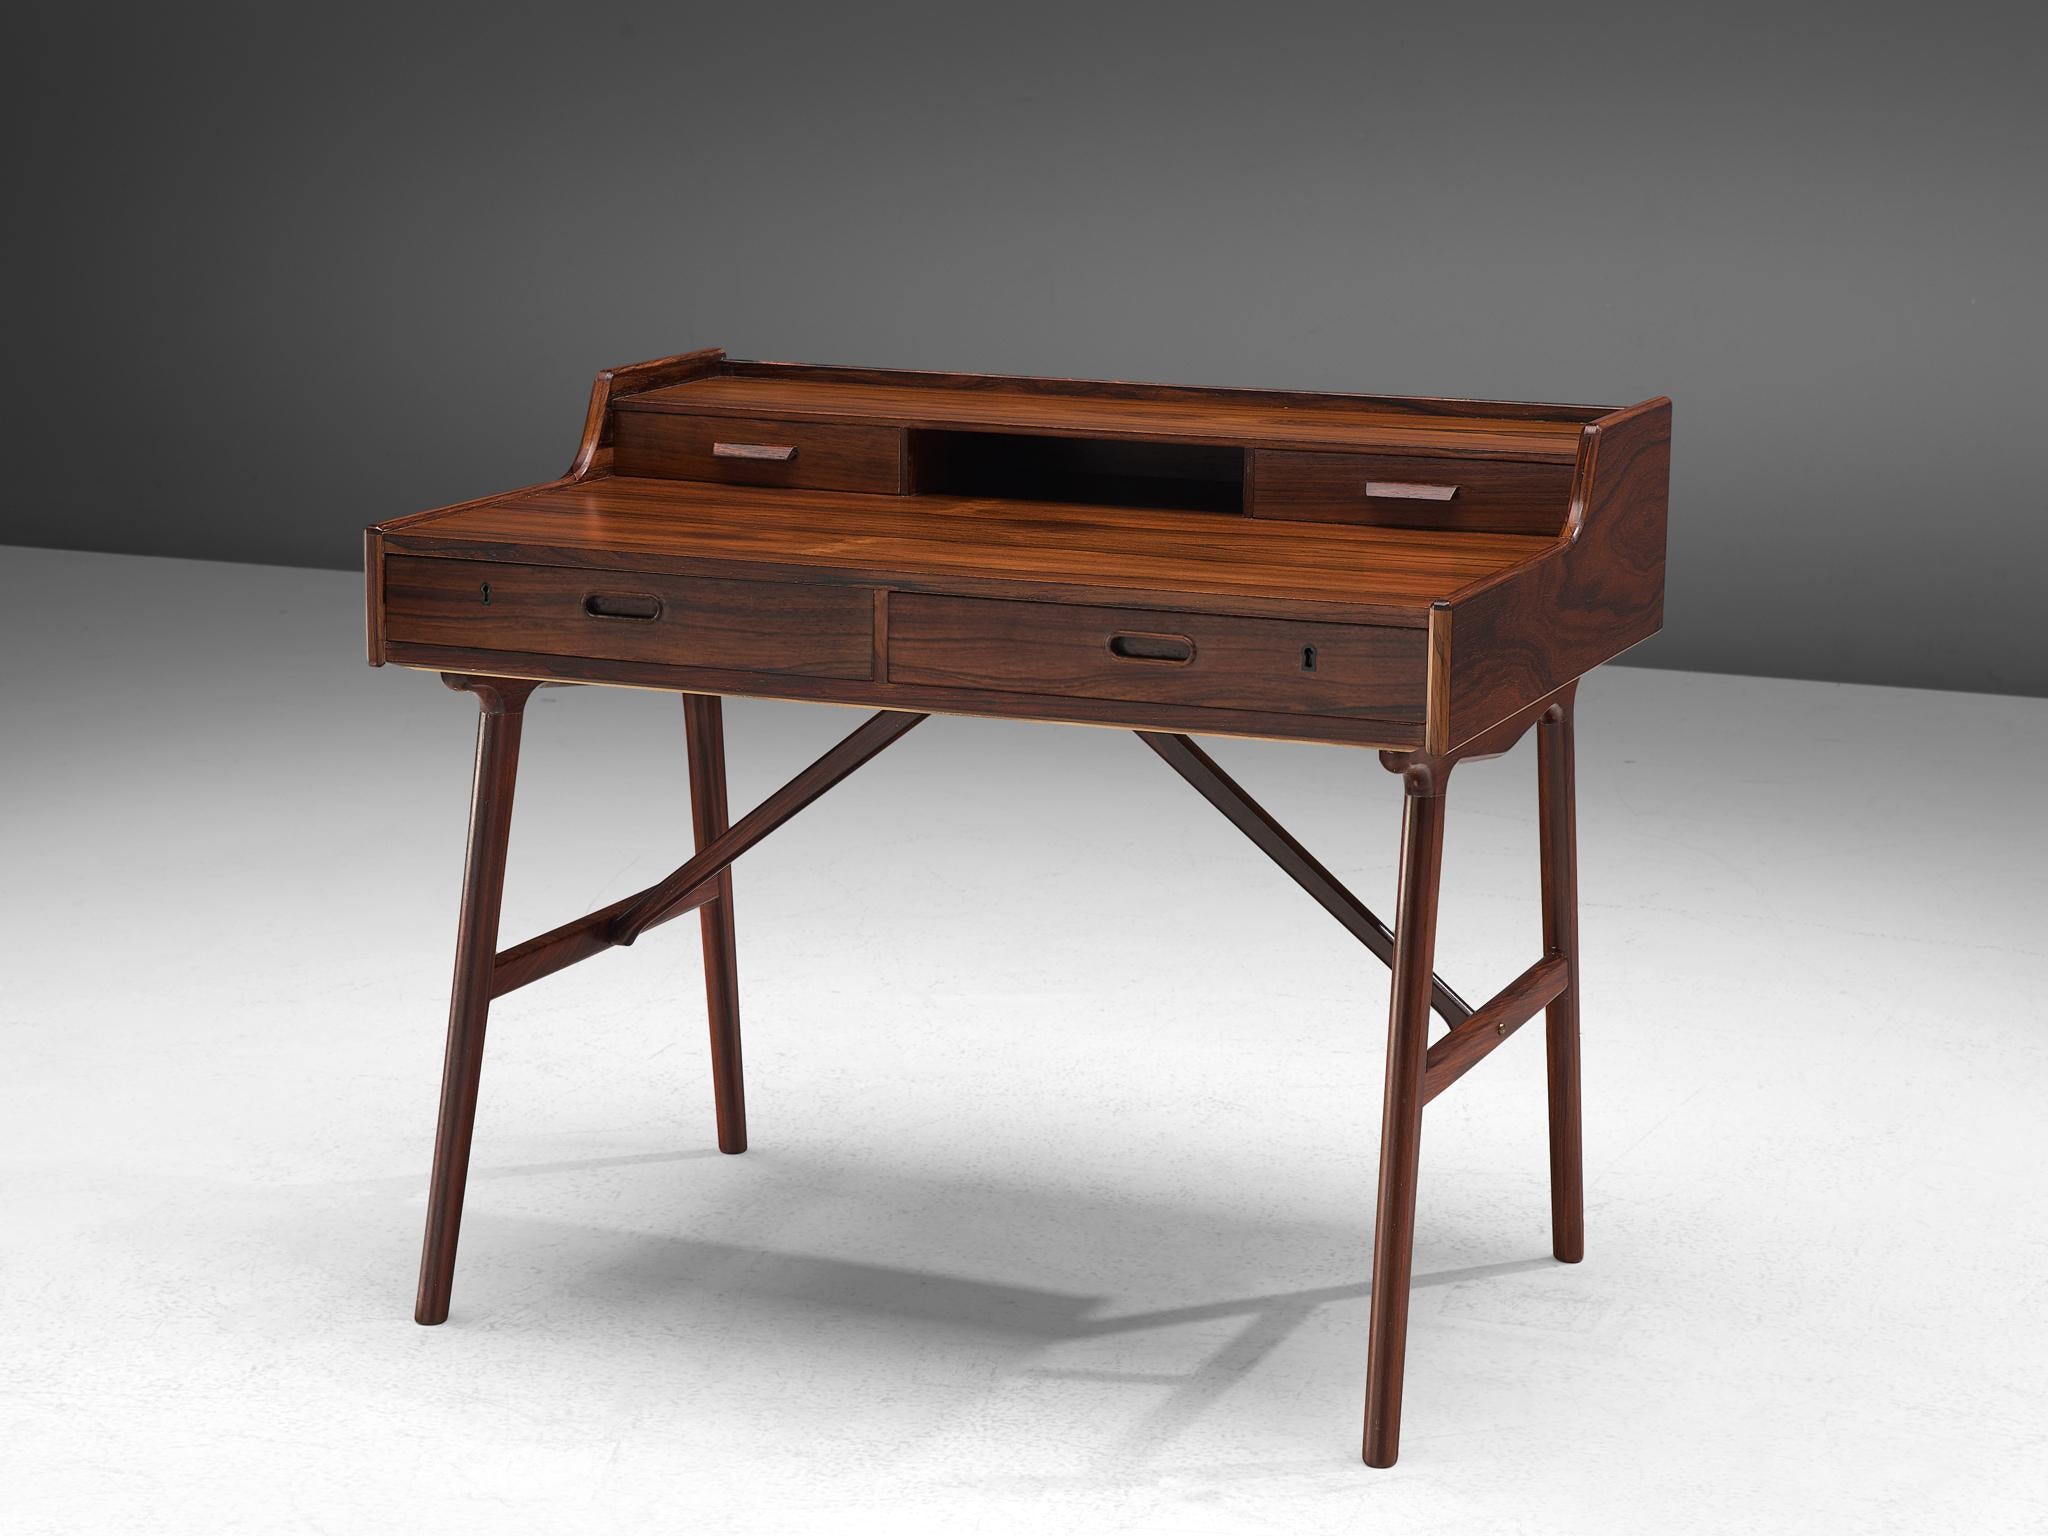 Arne Wahl Iversen for Vinde Møbelfabrik, Desk model 65, rosewood, Denmark, circa 1961.

Refined and excellent writing table by Danish designer Arne Wahl Iversen. This small writing table has a beautiful open look due the high tapered legs. The table